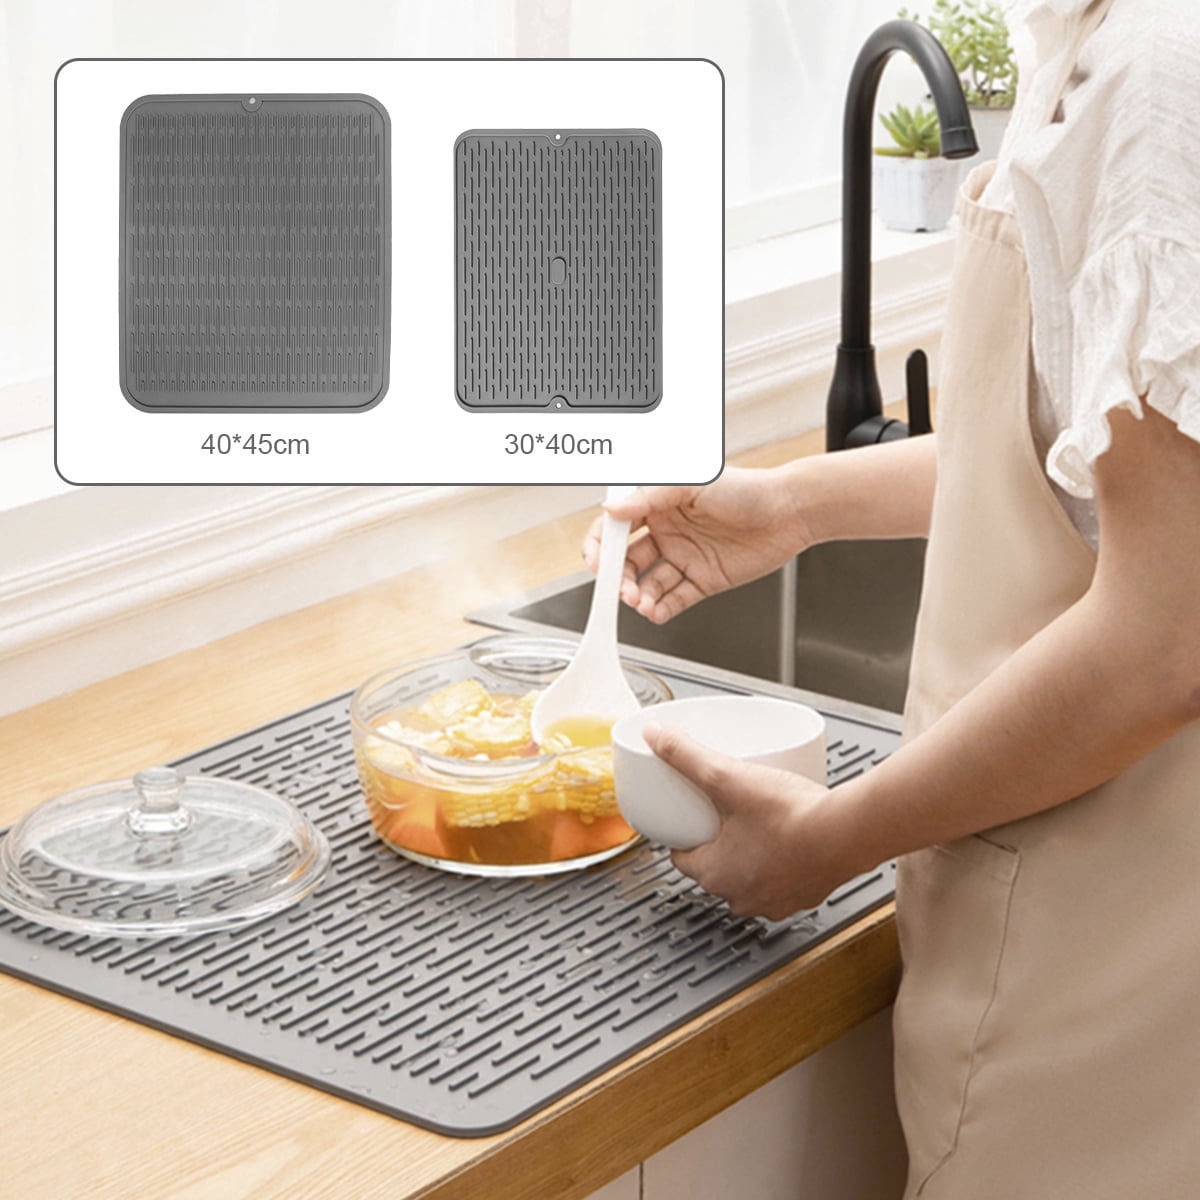 Stone Dish Drying Mat For Kitchen Counter, Fast Dry Diatomaceous